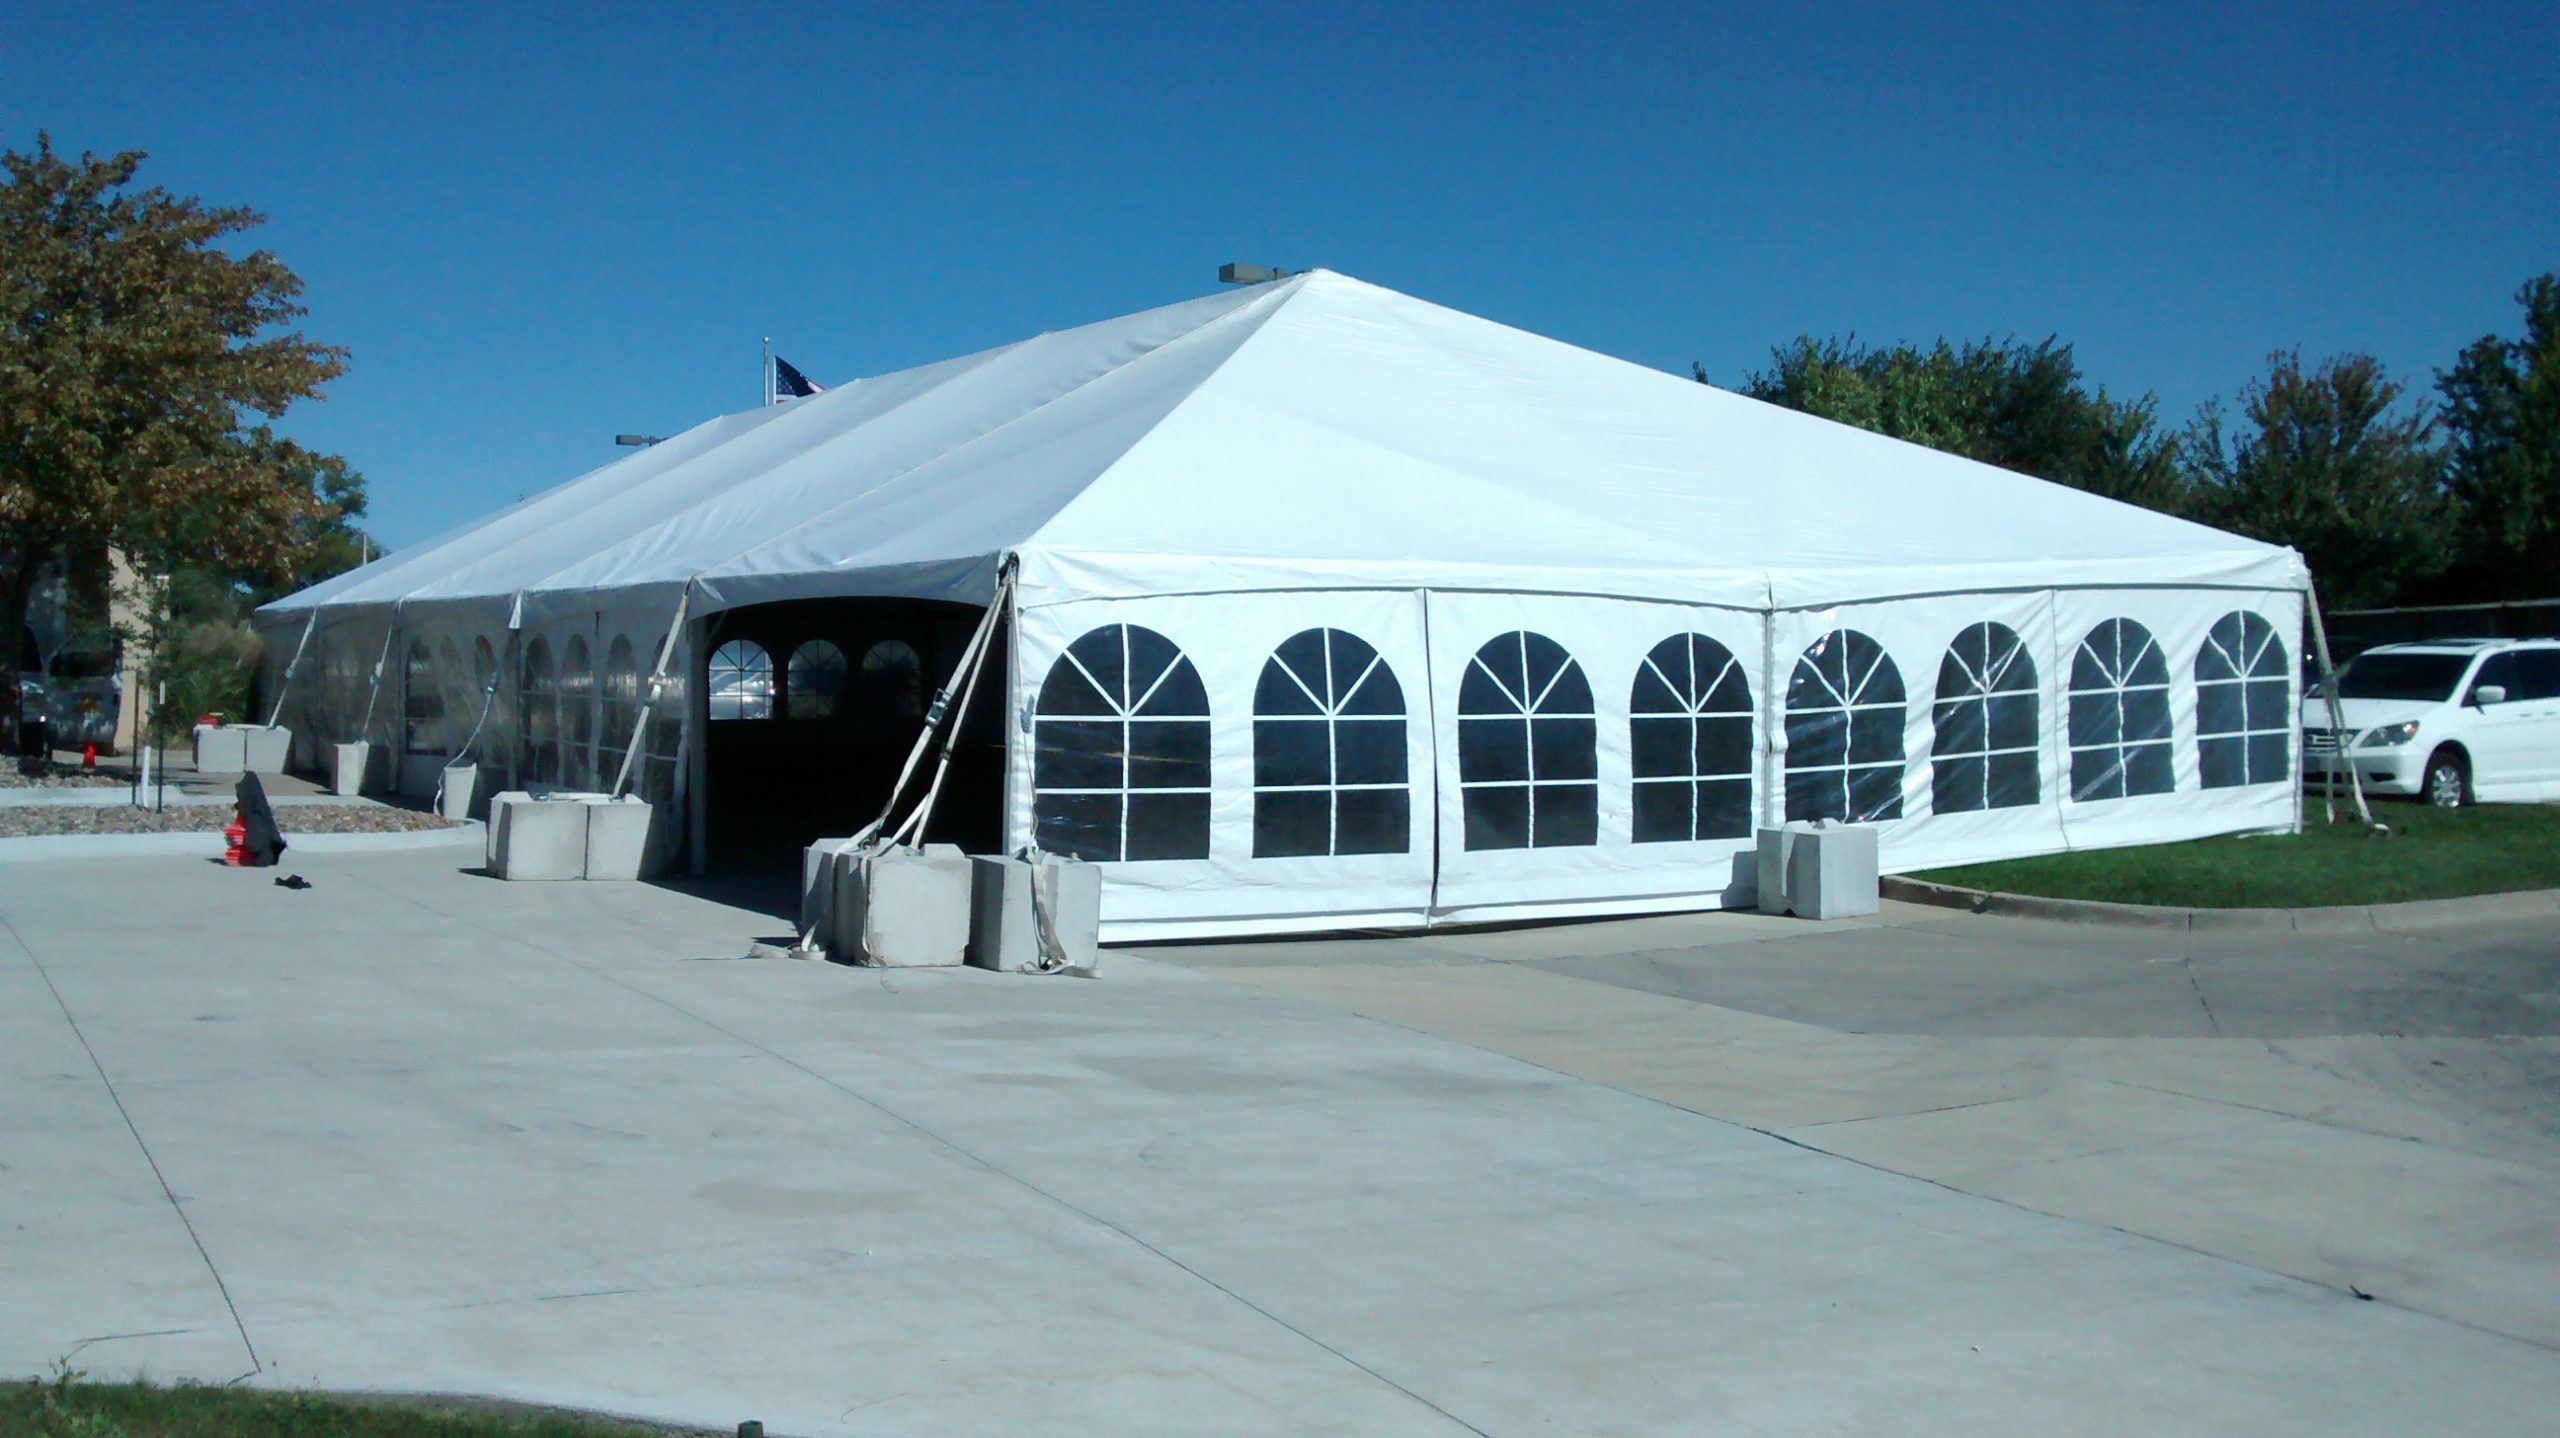 40' x 100' hybrid tent setup for a fundraiser in Ankeny, IA